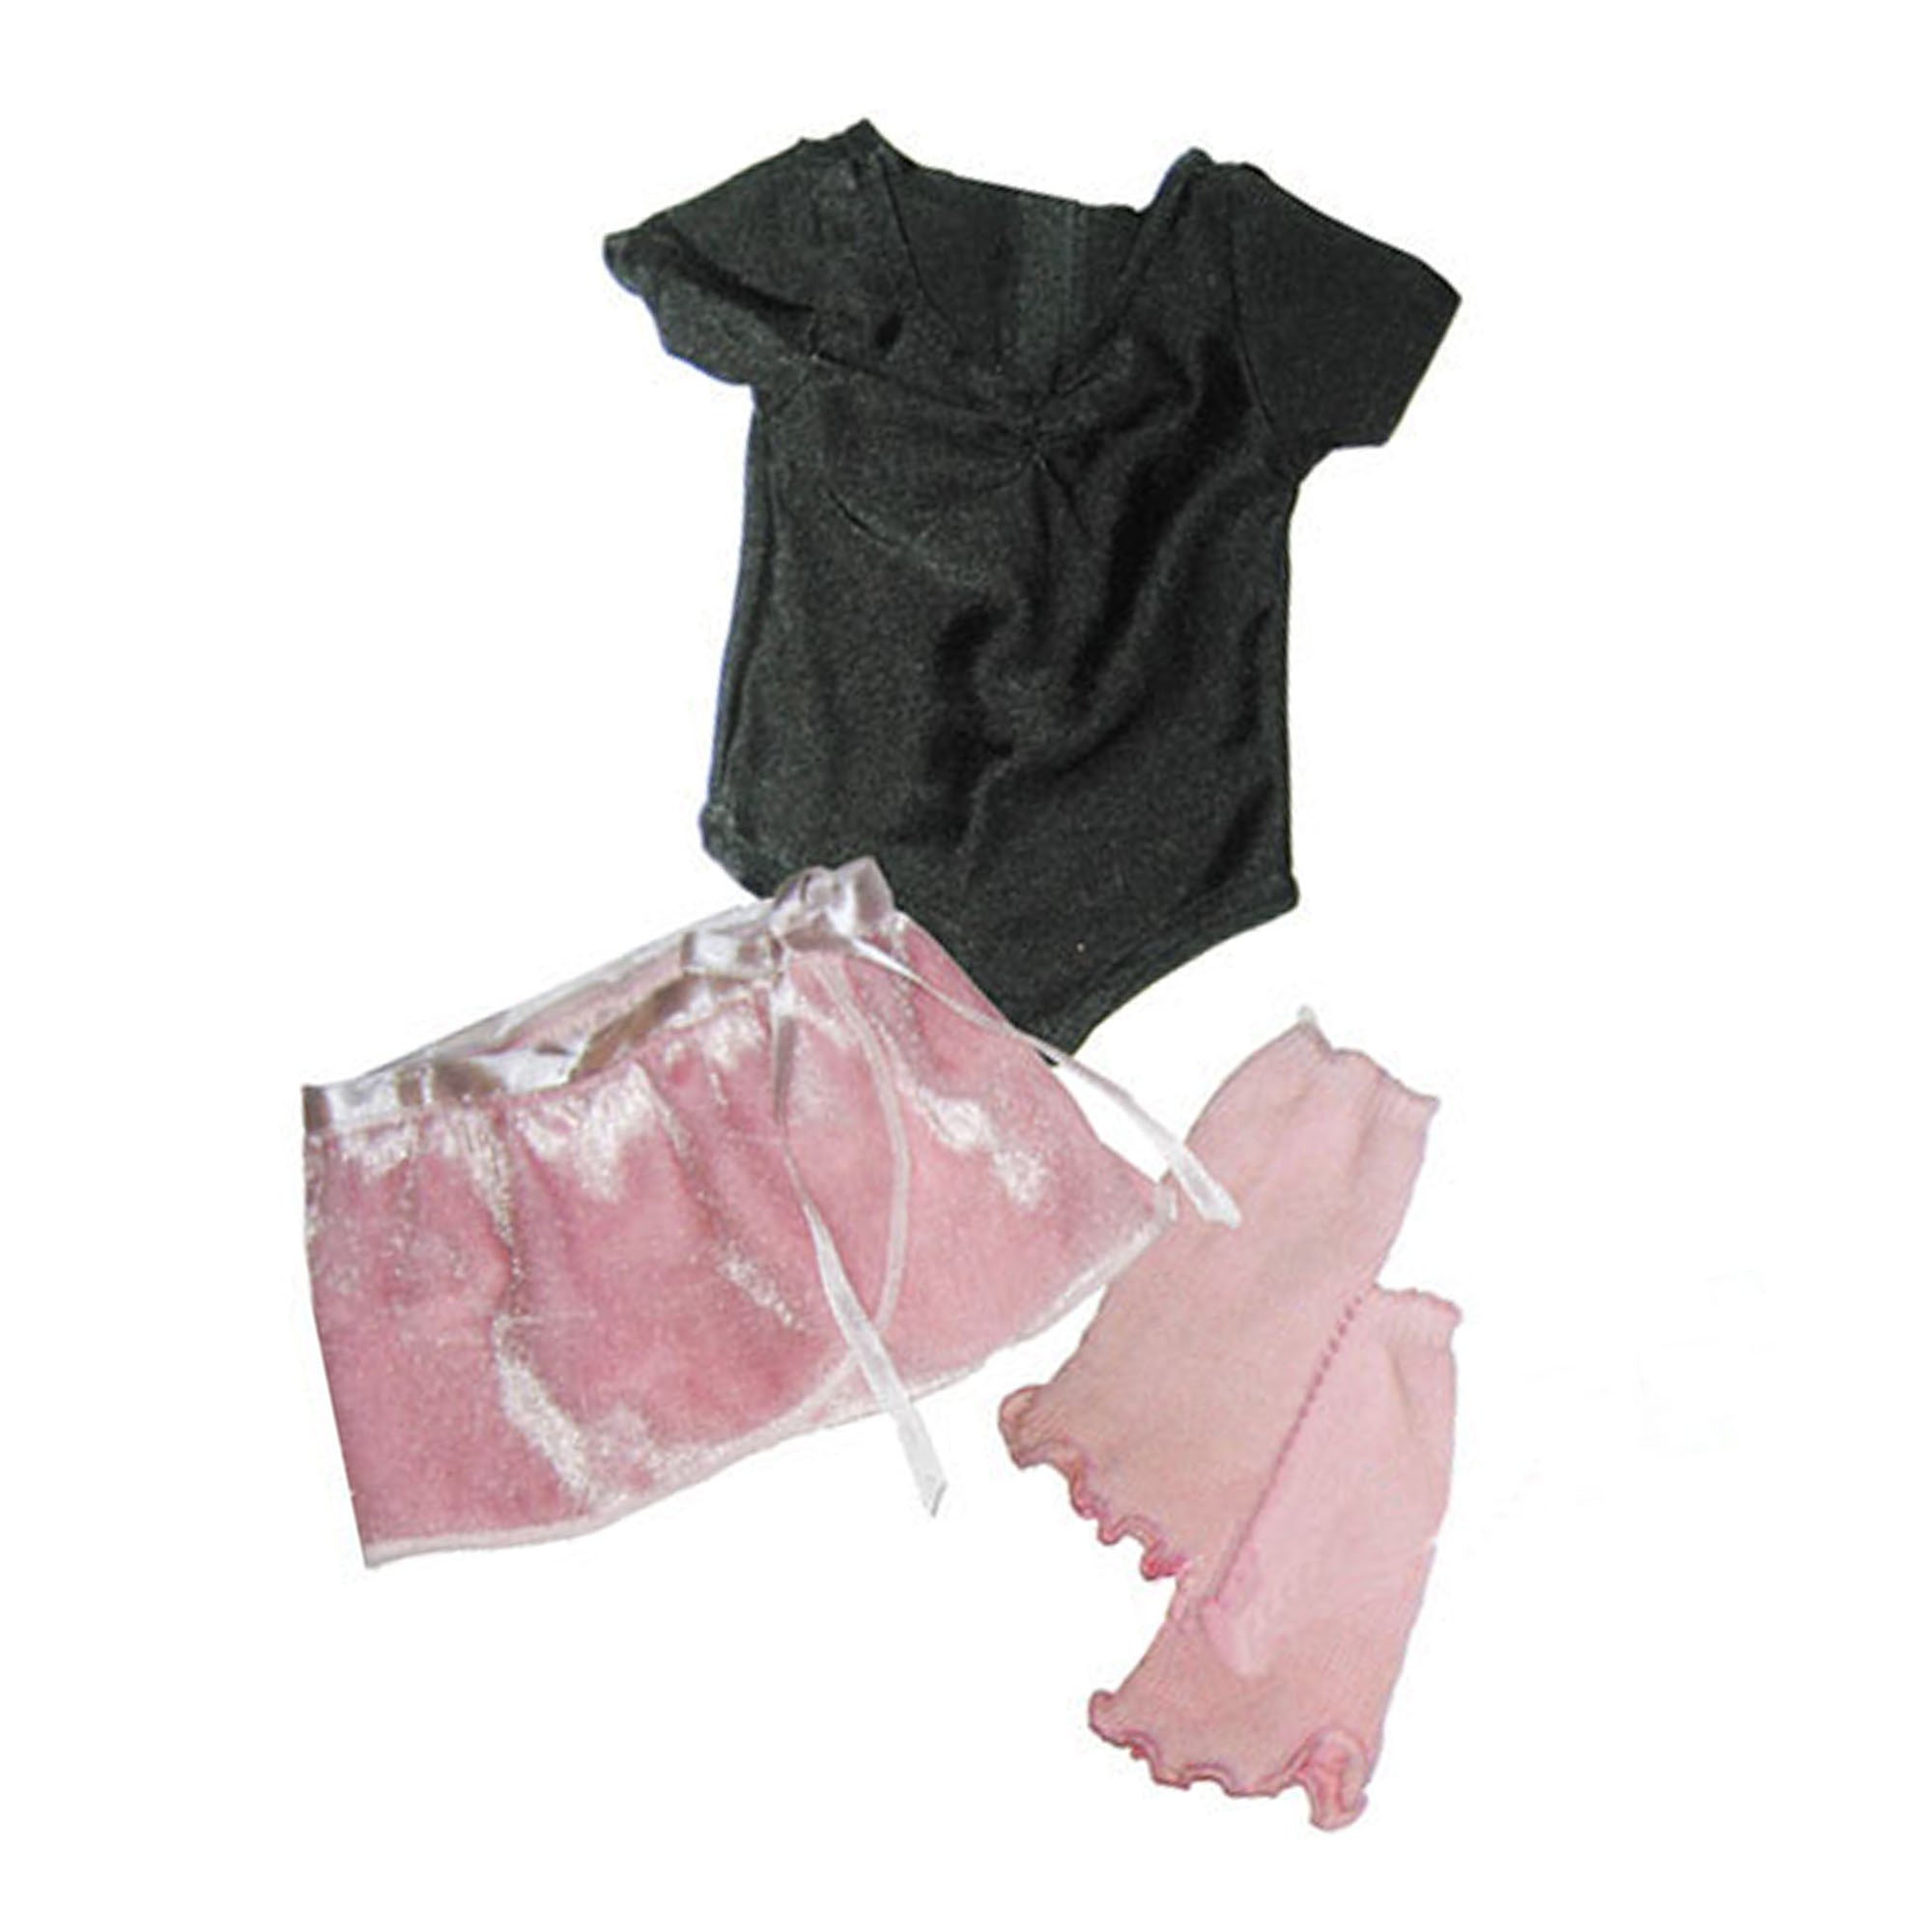 Sophia’s Complete Three-Piece Ballet Leotard, Satin-Tie Skirt, & Knit Leg Warmers Outfit Set for 18” Dolls, Light Pink